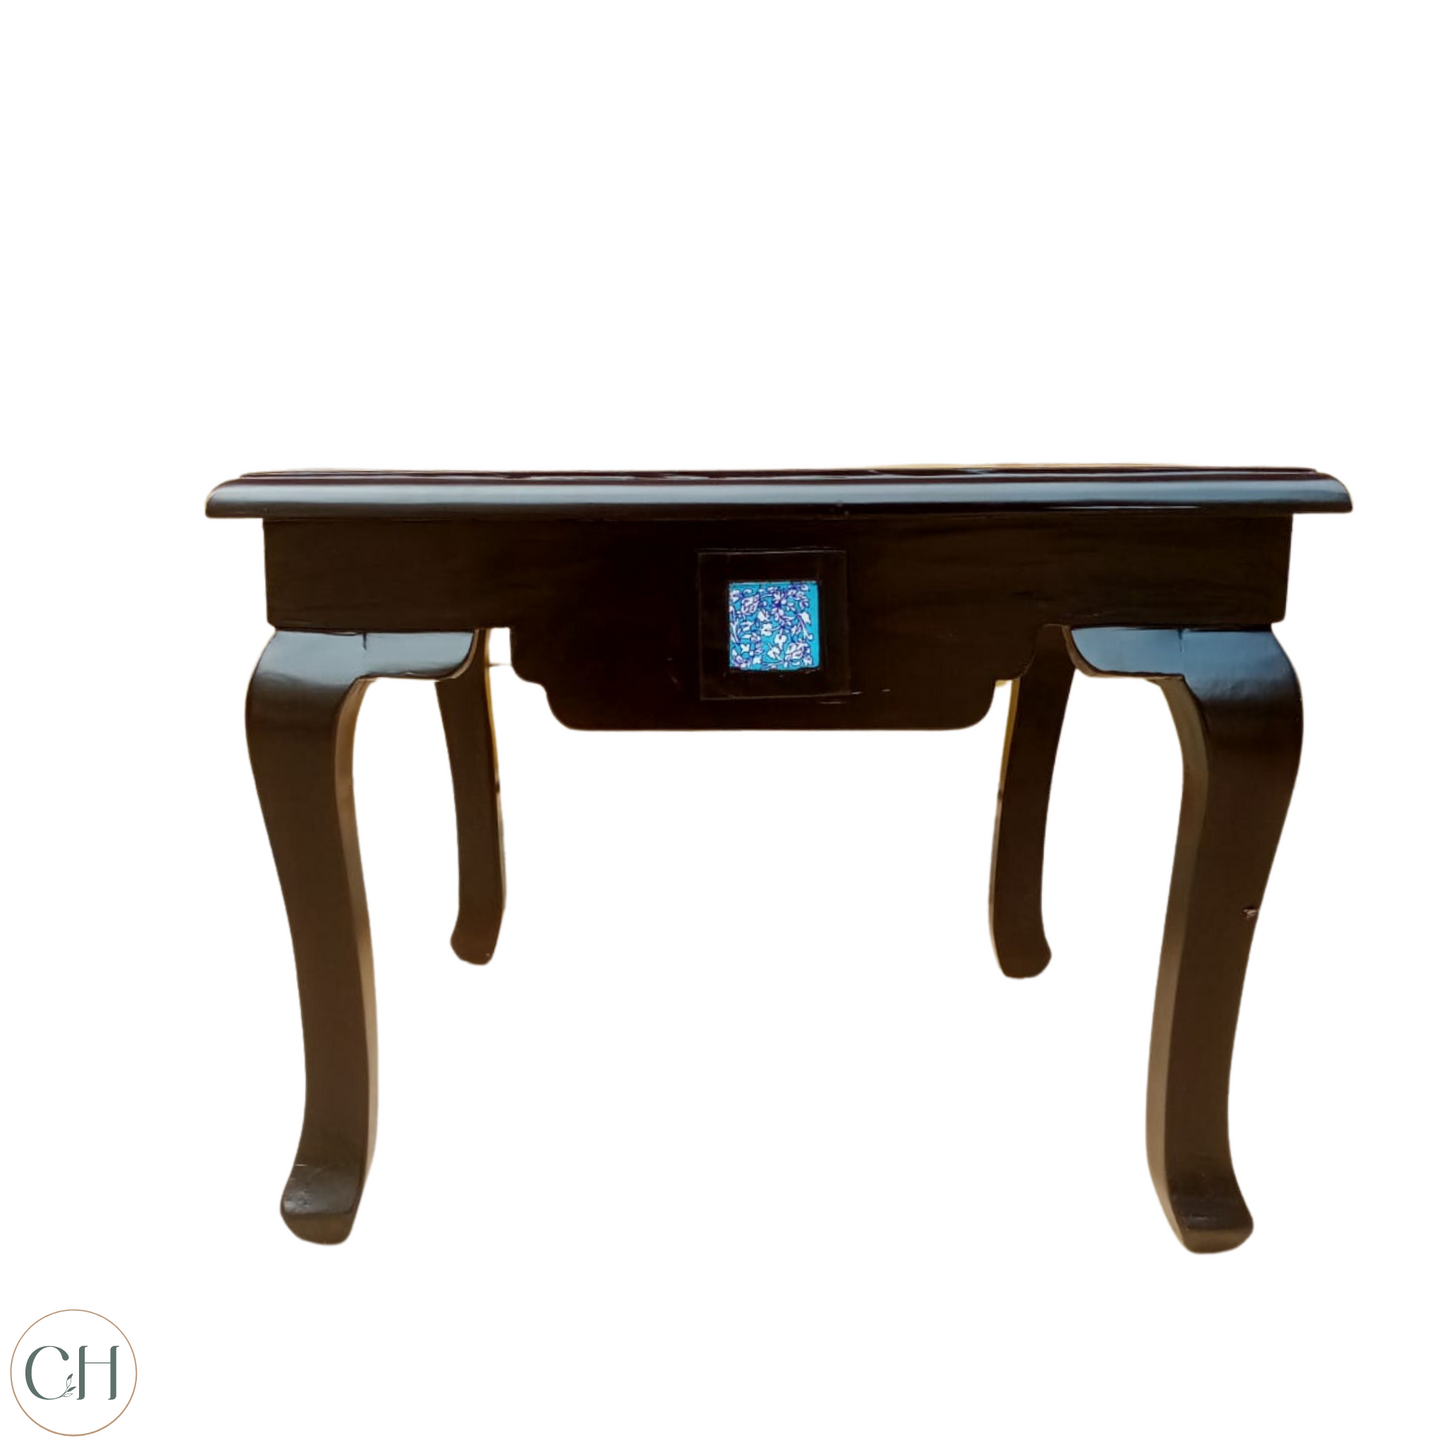 Viola - Ornate Solid Wood Side Table with Toughened Glass Top - CustHum